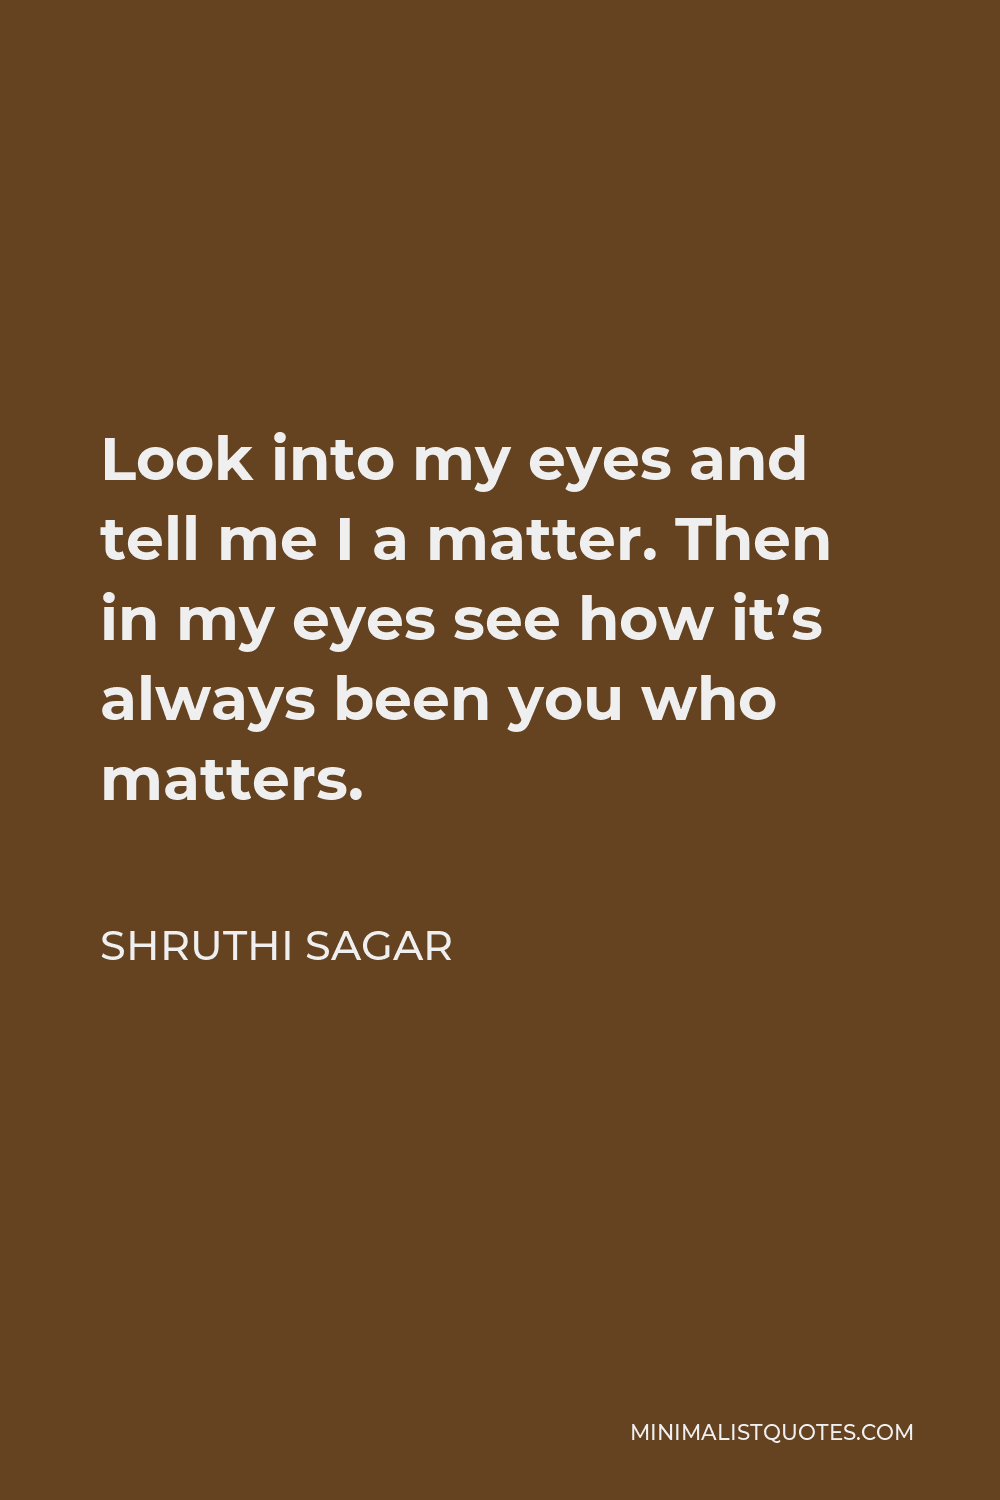 Shruthi Sagar Quote - Look into my eyes and tell me I a matter. Then in my eyes see how it’s always been you who matters.